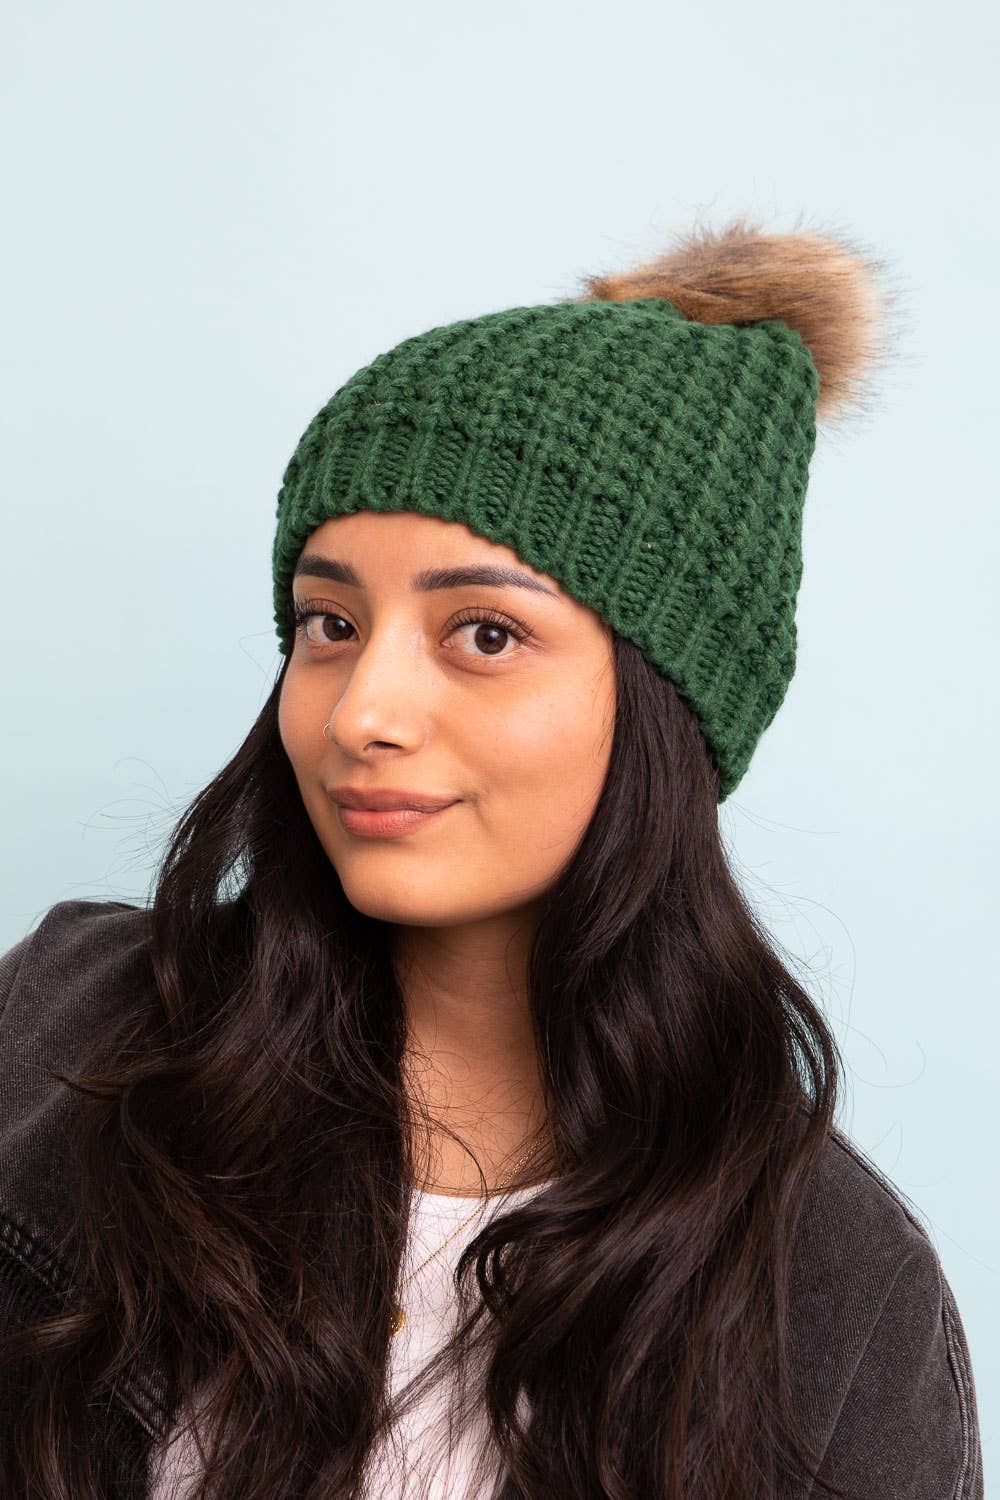 Textured Beanie With Pom Pom - Whimsical Details